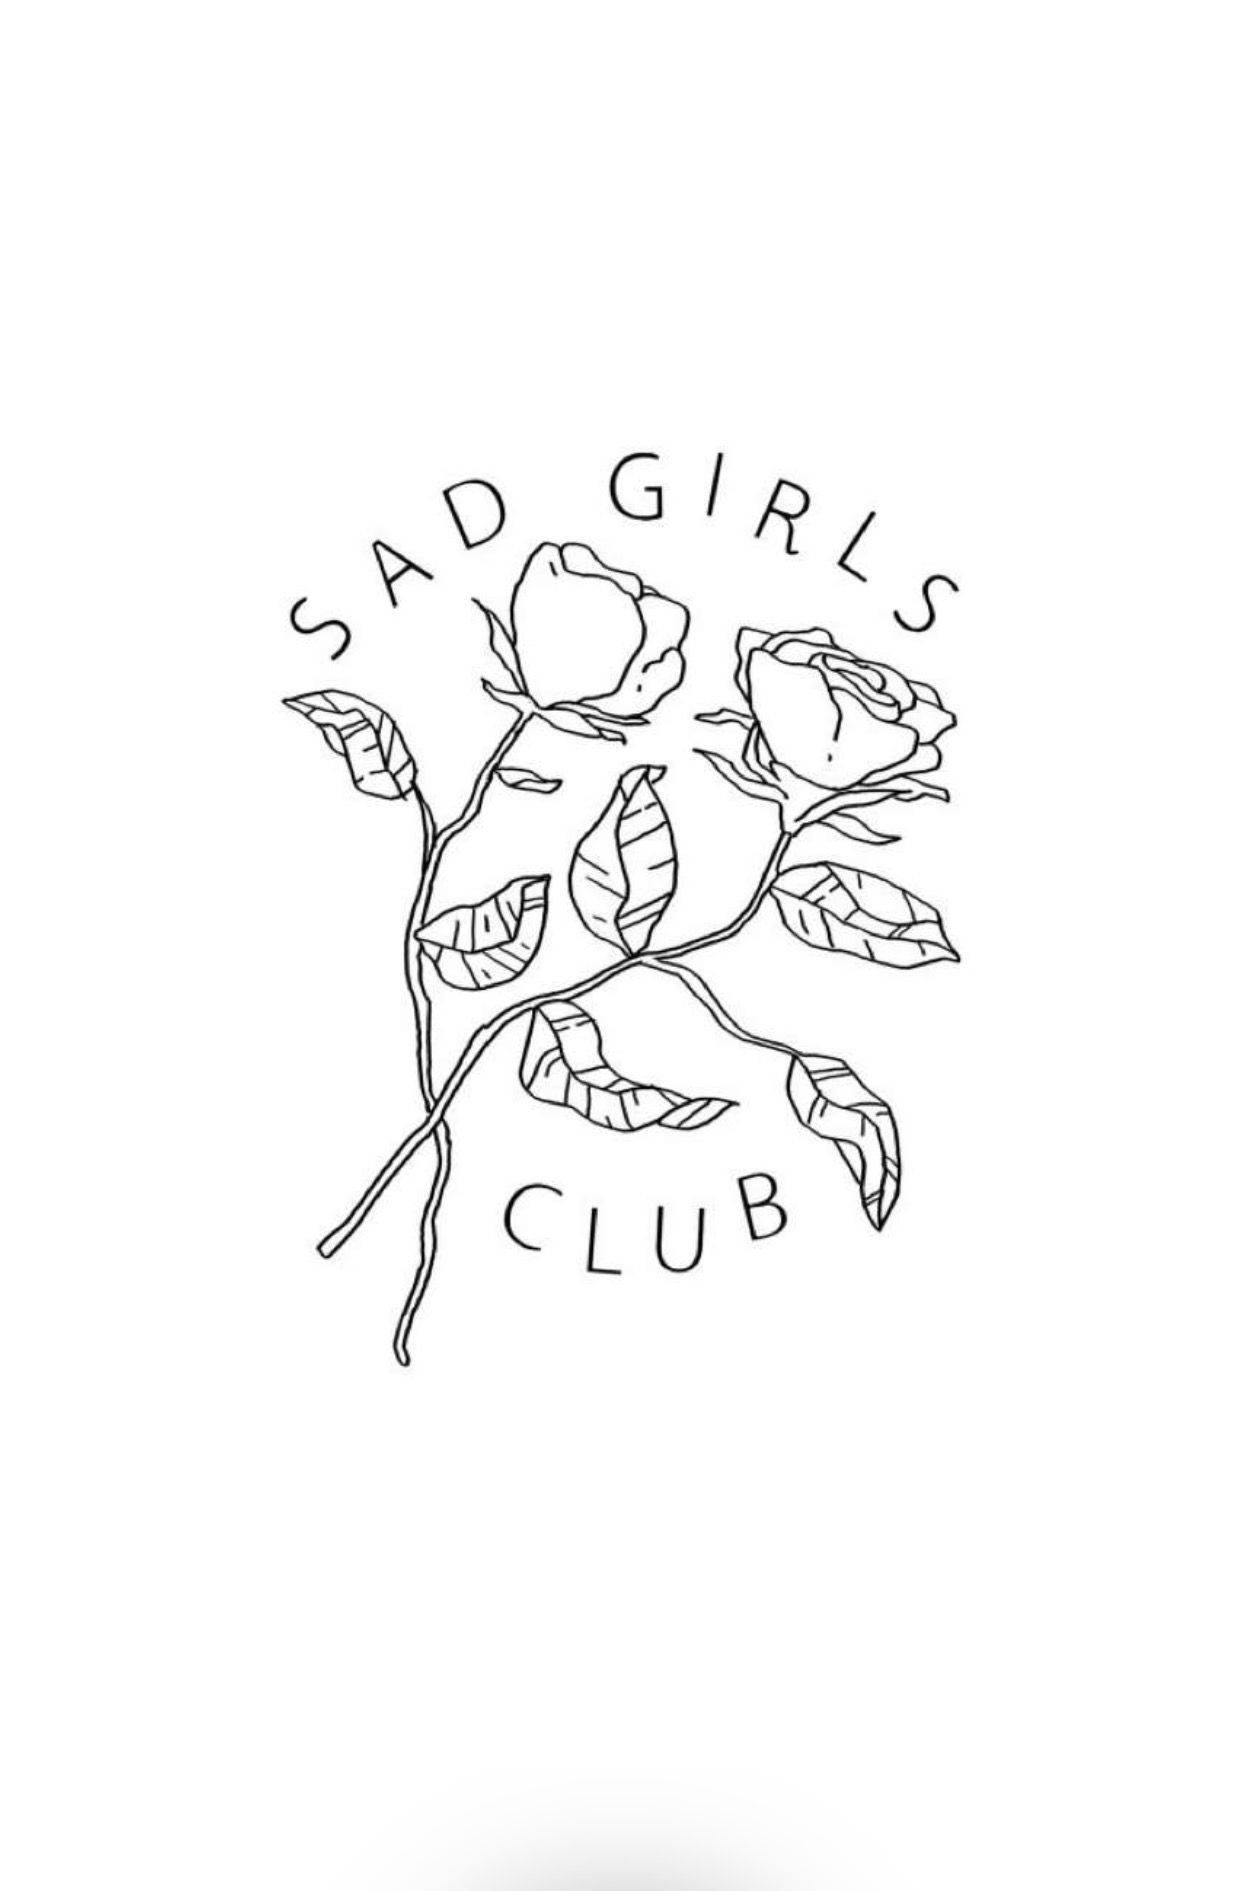 Sad Girls Club With Roses Indie Phone Picture